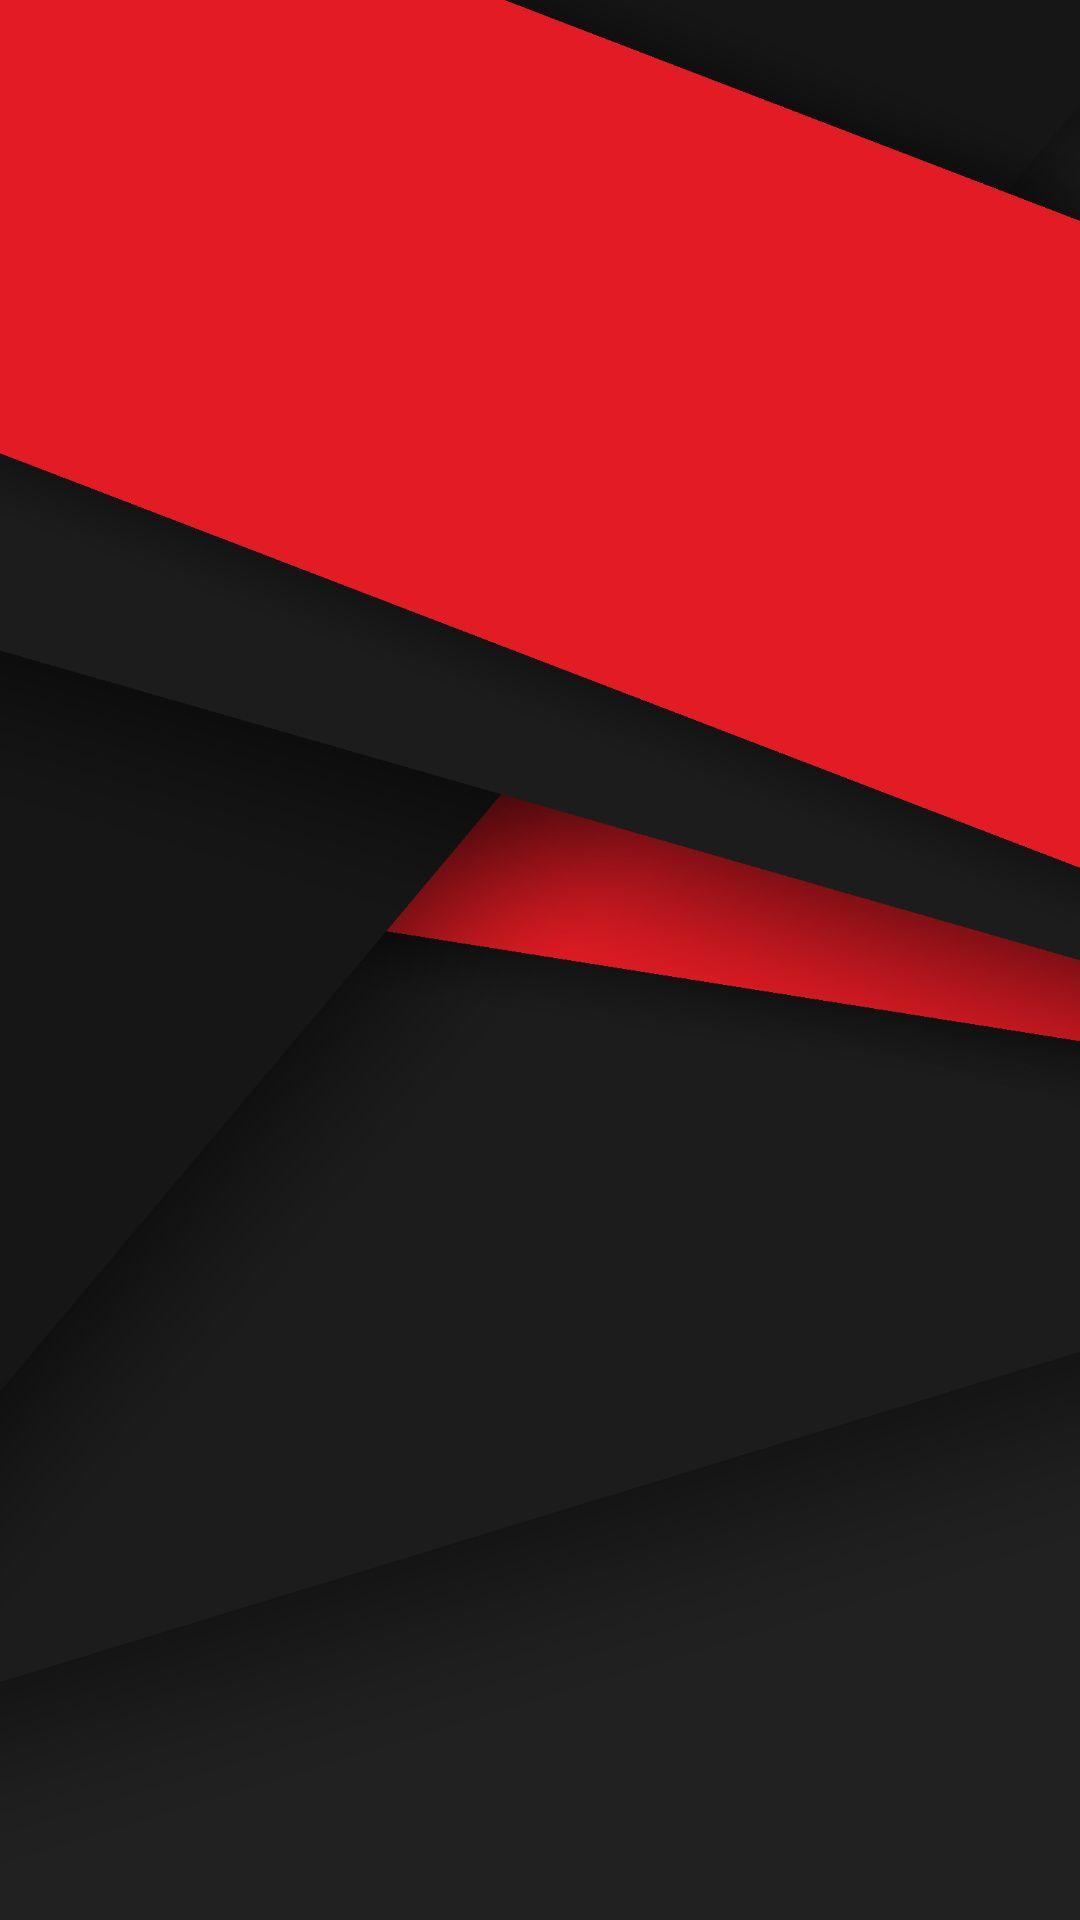 Gallery Red And Black Material Design Mobile Hd Wallpaper. Red And Black Wallpaper, Black HD Wallpaper, Black Wallpaper